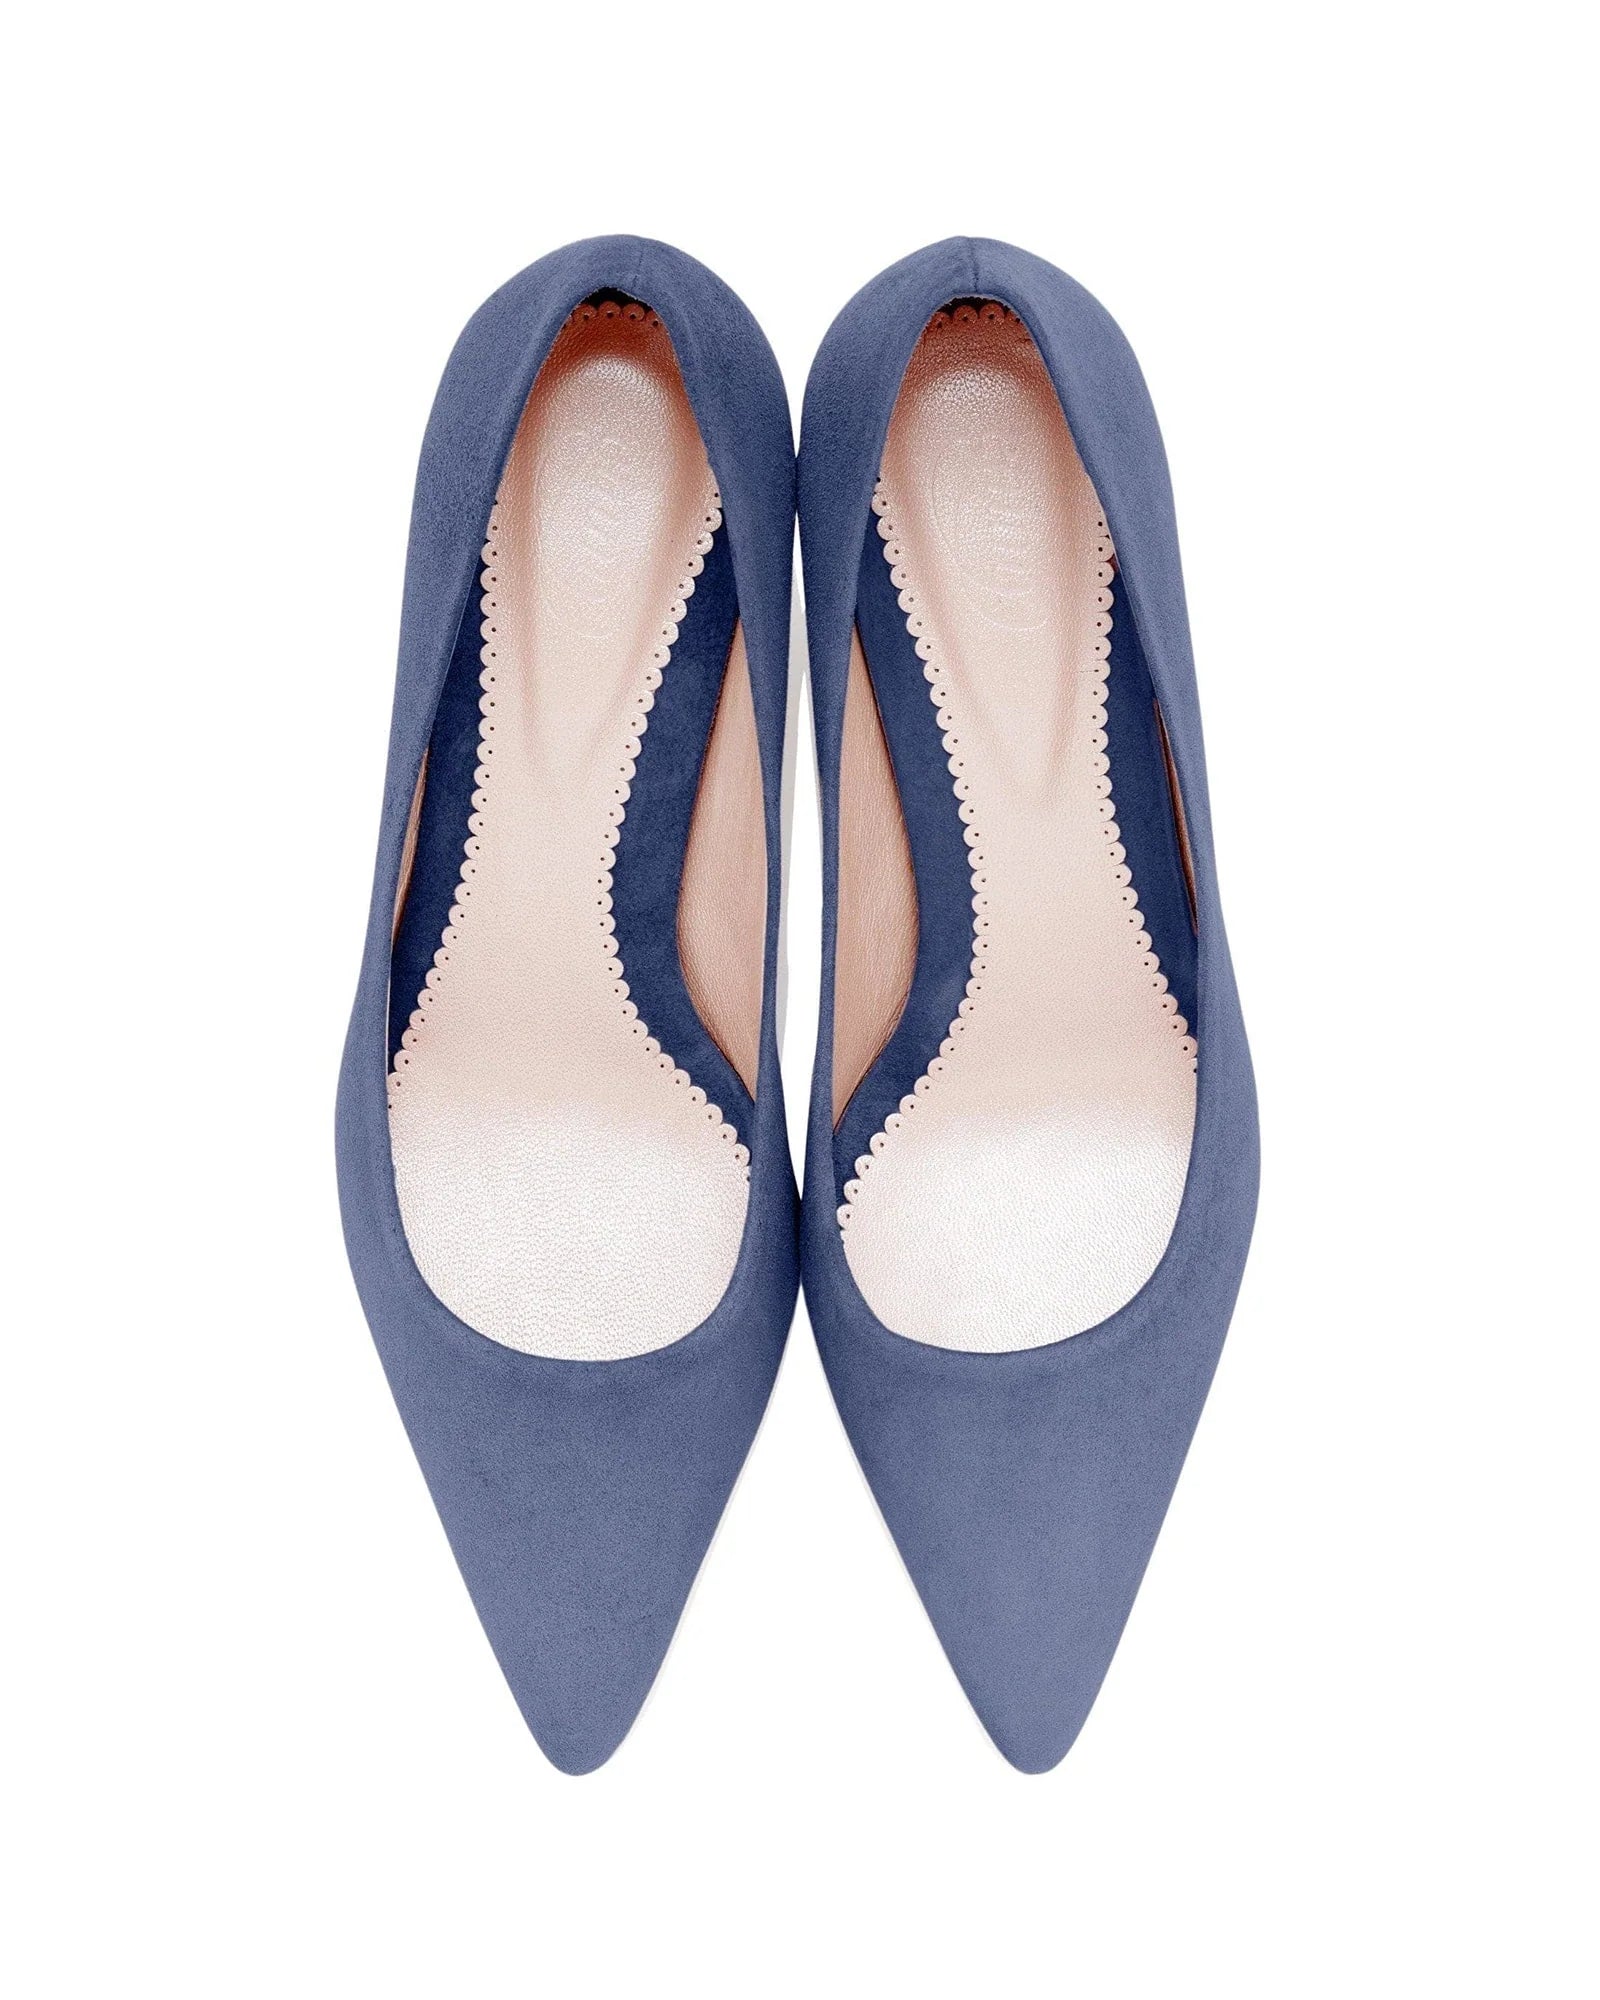 Olivia Mid Heel Fashion Shoe Blue-Grey Suede Pointed Court  image